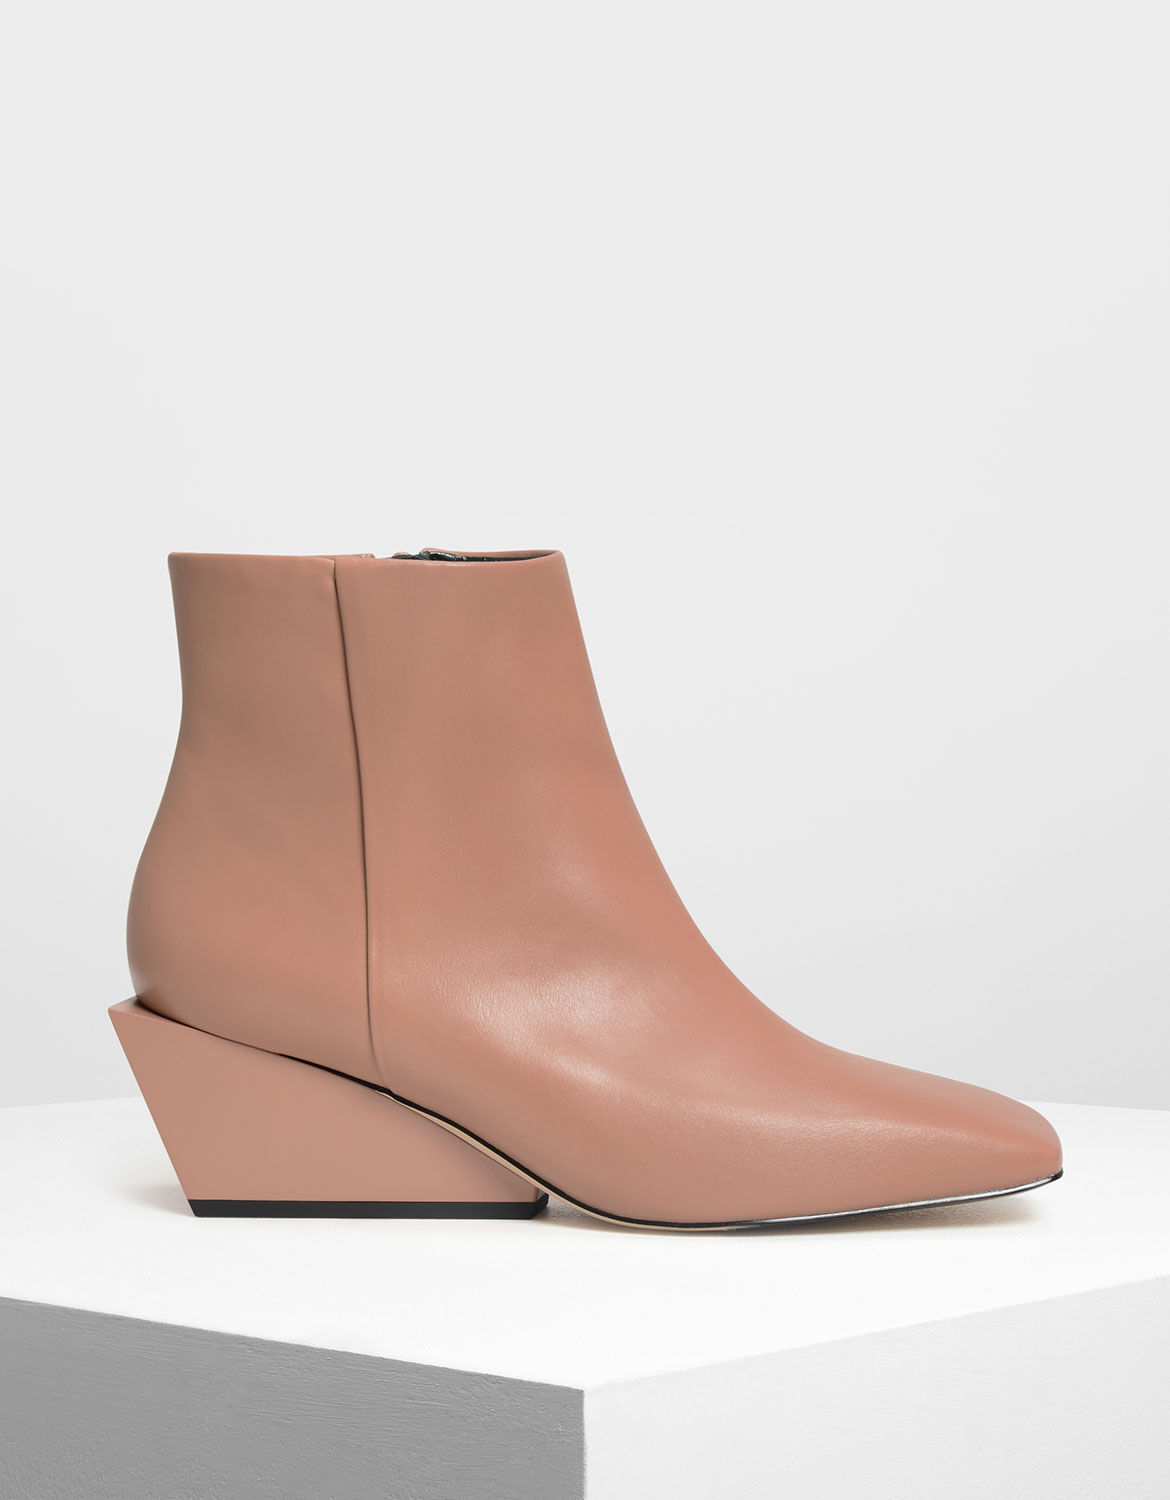 wedge boots 2018